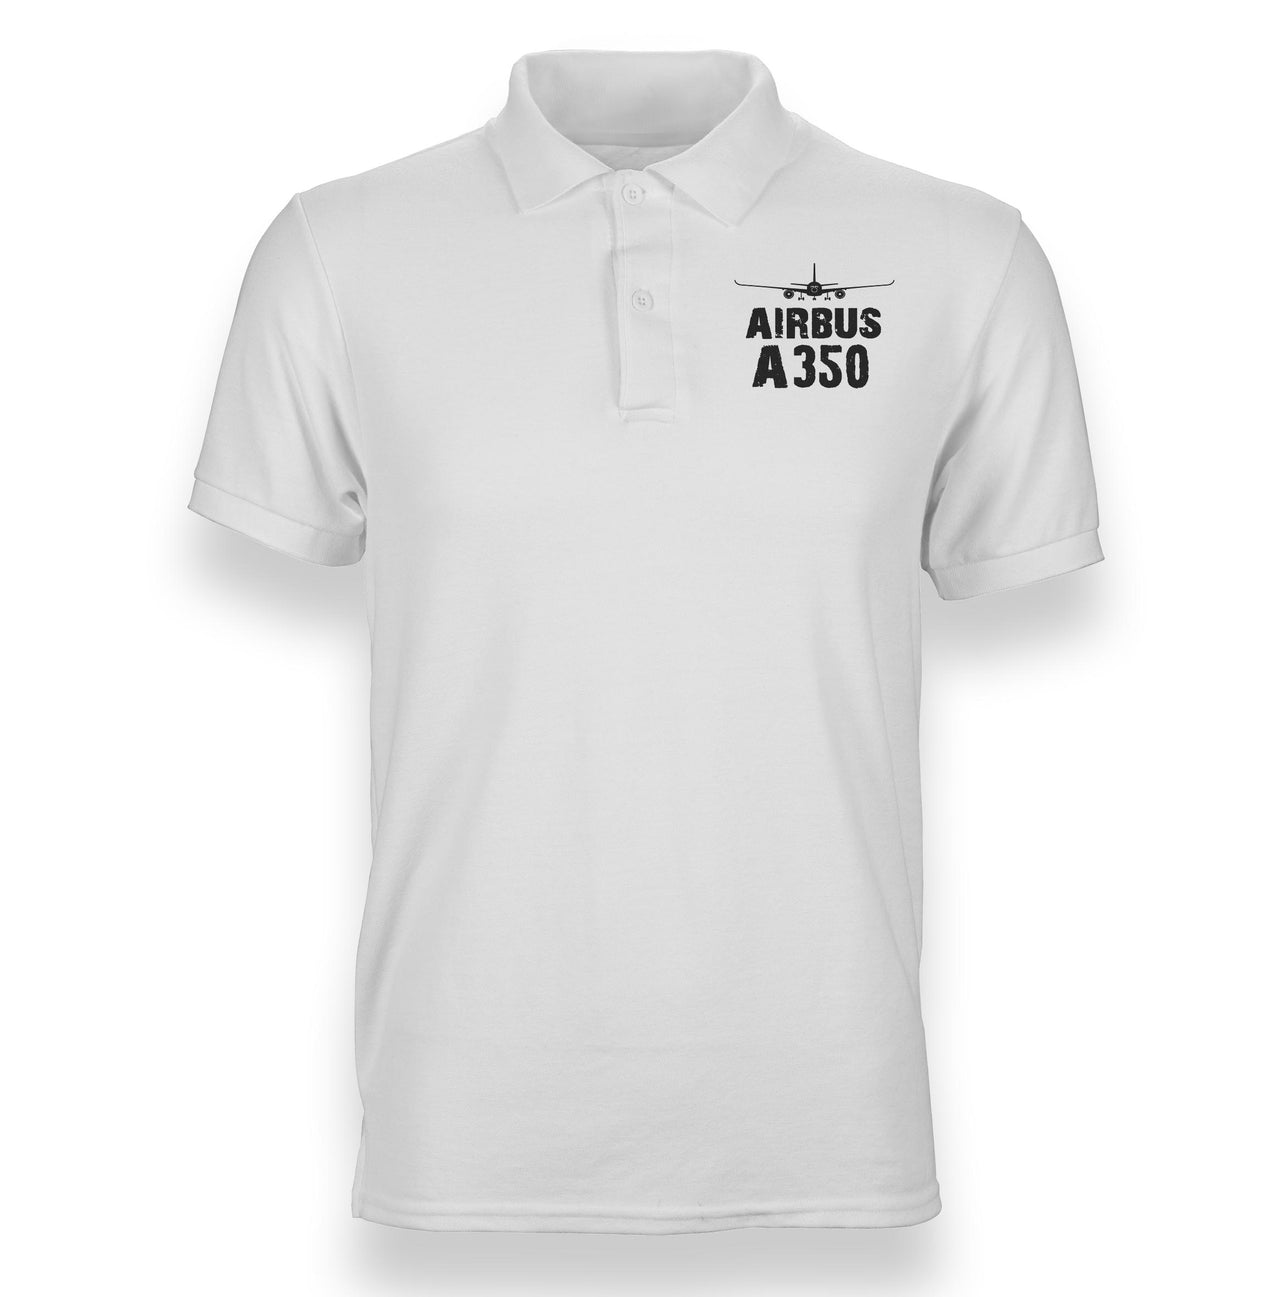 Airbus A350 & Plane Designed Polo T-Shirts